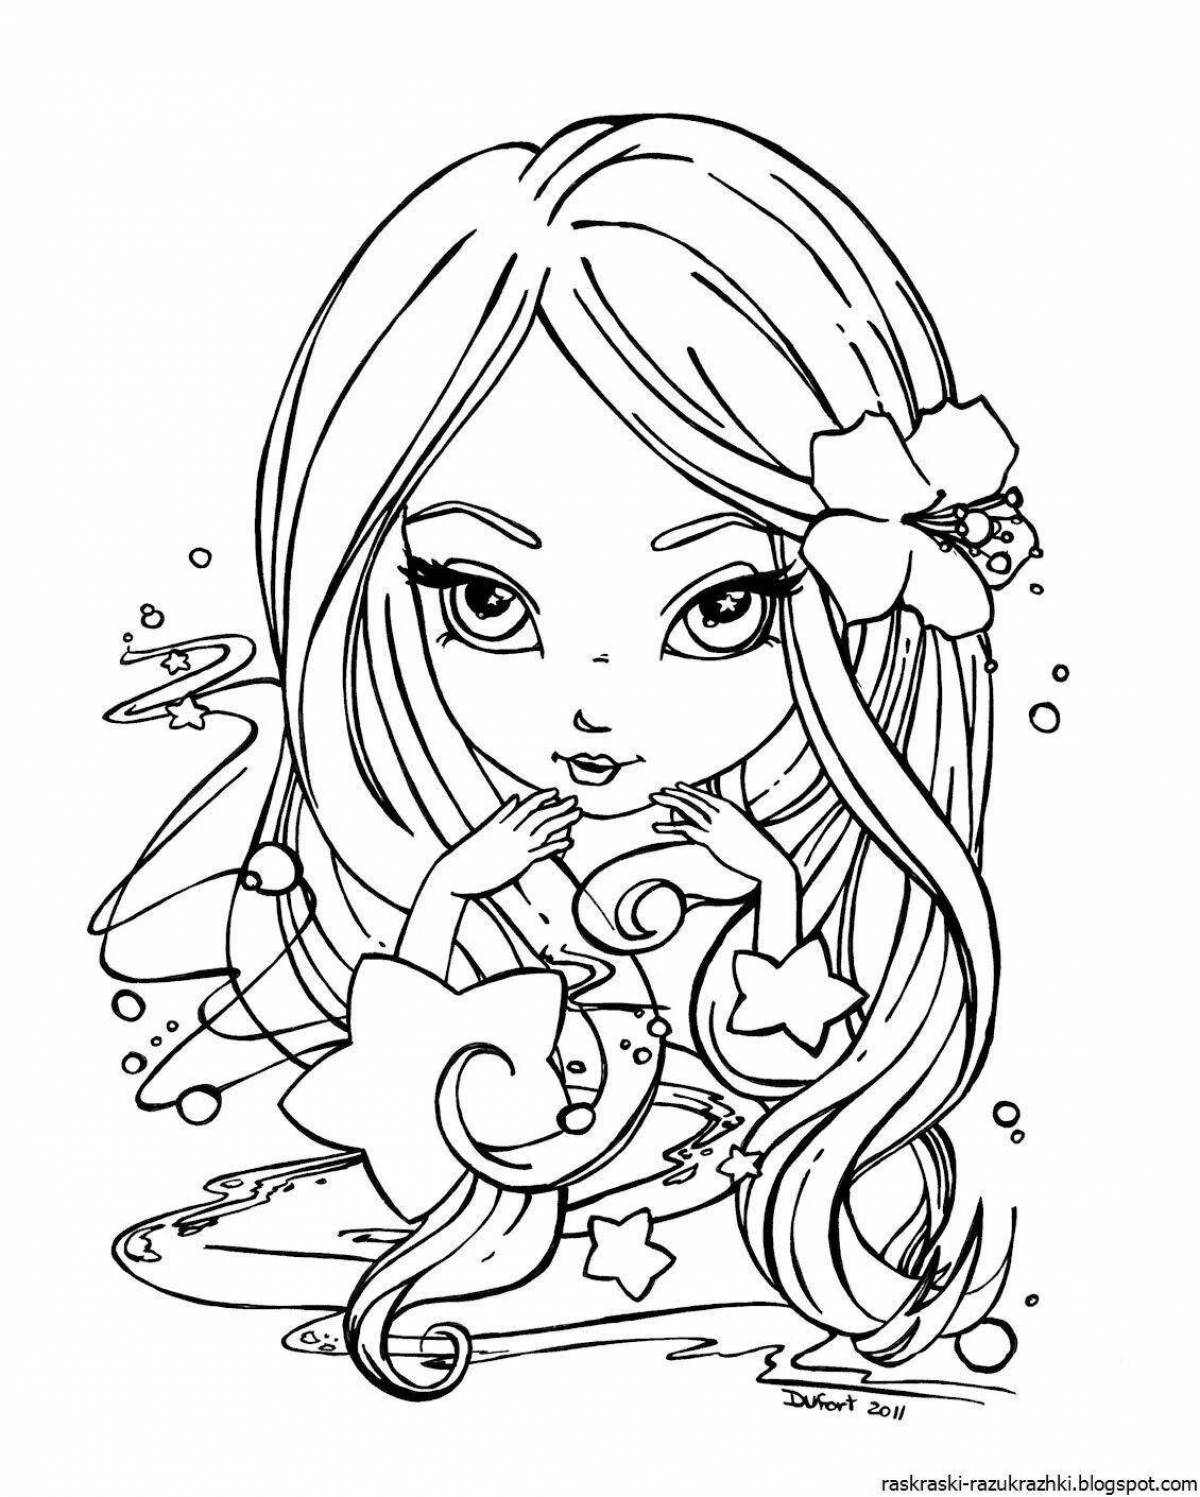 Serene coloring page beautiful for girls 11 years old